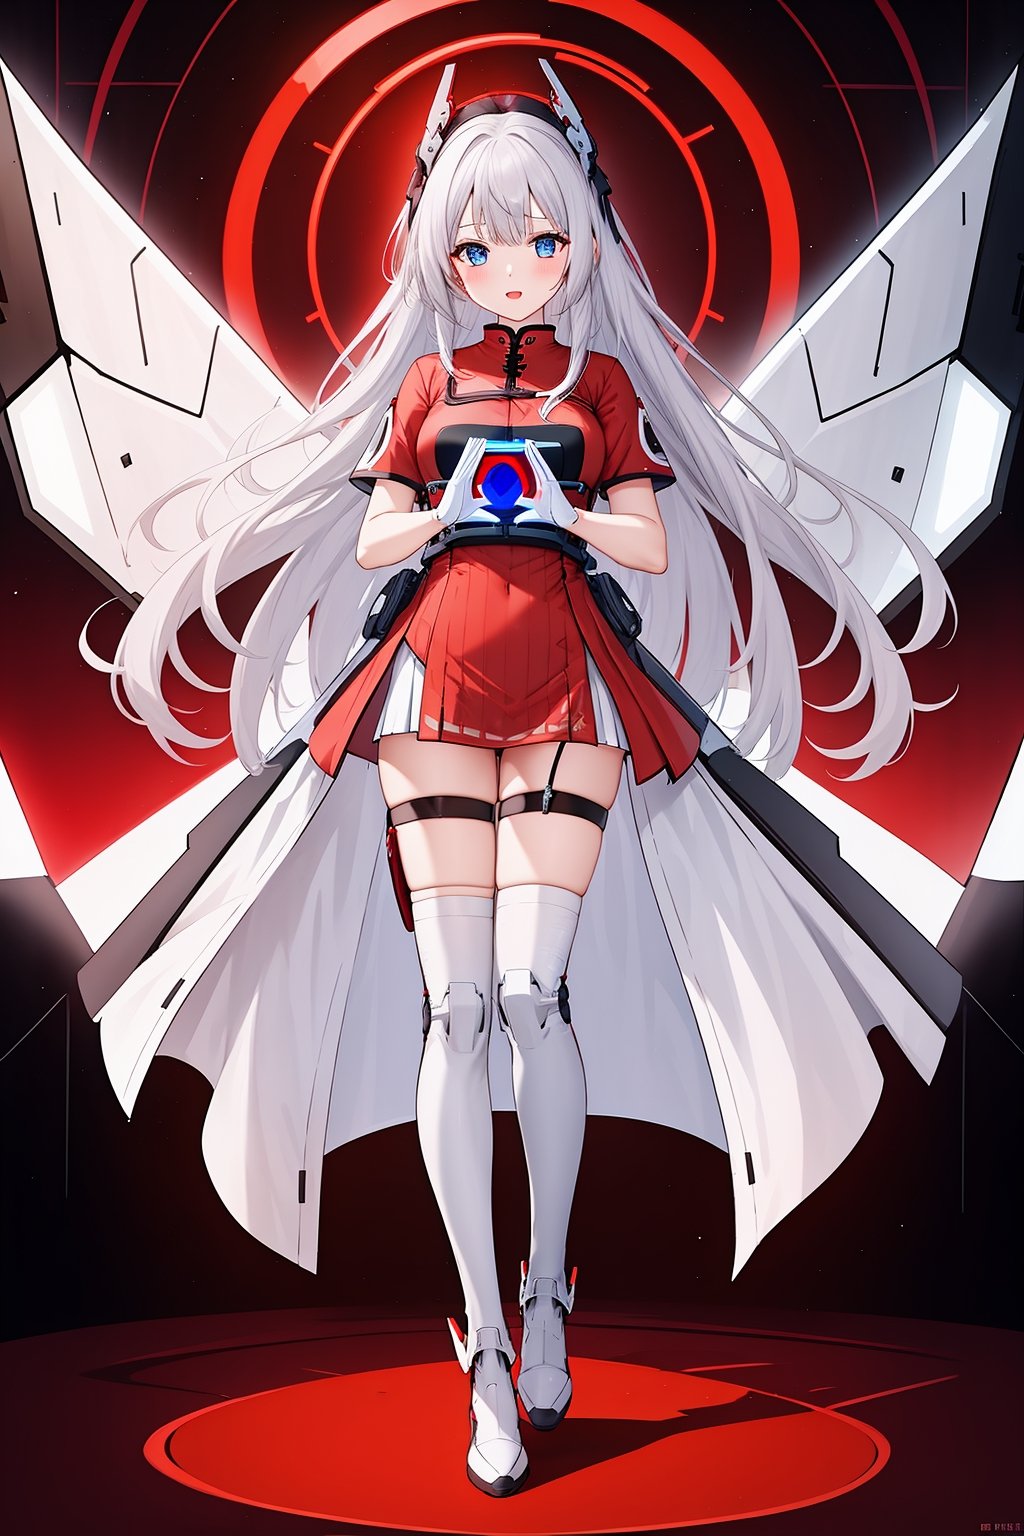 1 girl, solo, red Mecha pants, wings, blue eyes, long hair, red shoes, hair accessories, looking at the audience, white hair, hair accessories, bangs, blue eyes, staff, clean background, mechanical wings, (video card fan), gloves, red, simple background, cute, video card promo character, console, keyboard, mouse, handle, red cheongsam, festive, Red theme, ancient Chinese architecture, cheongsam<lora:天启姬:0.7>,